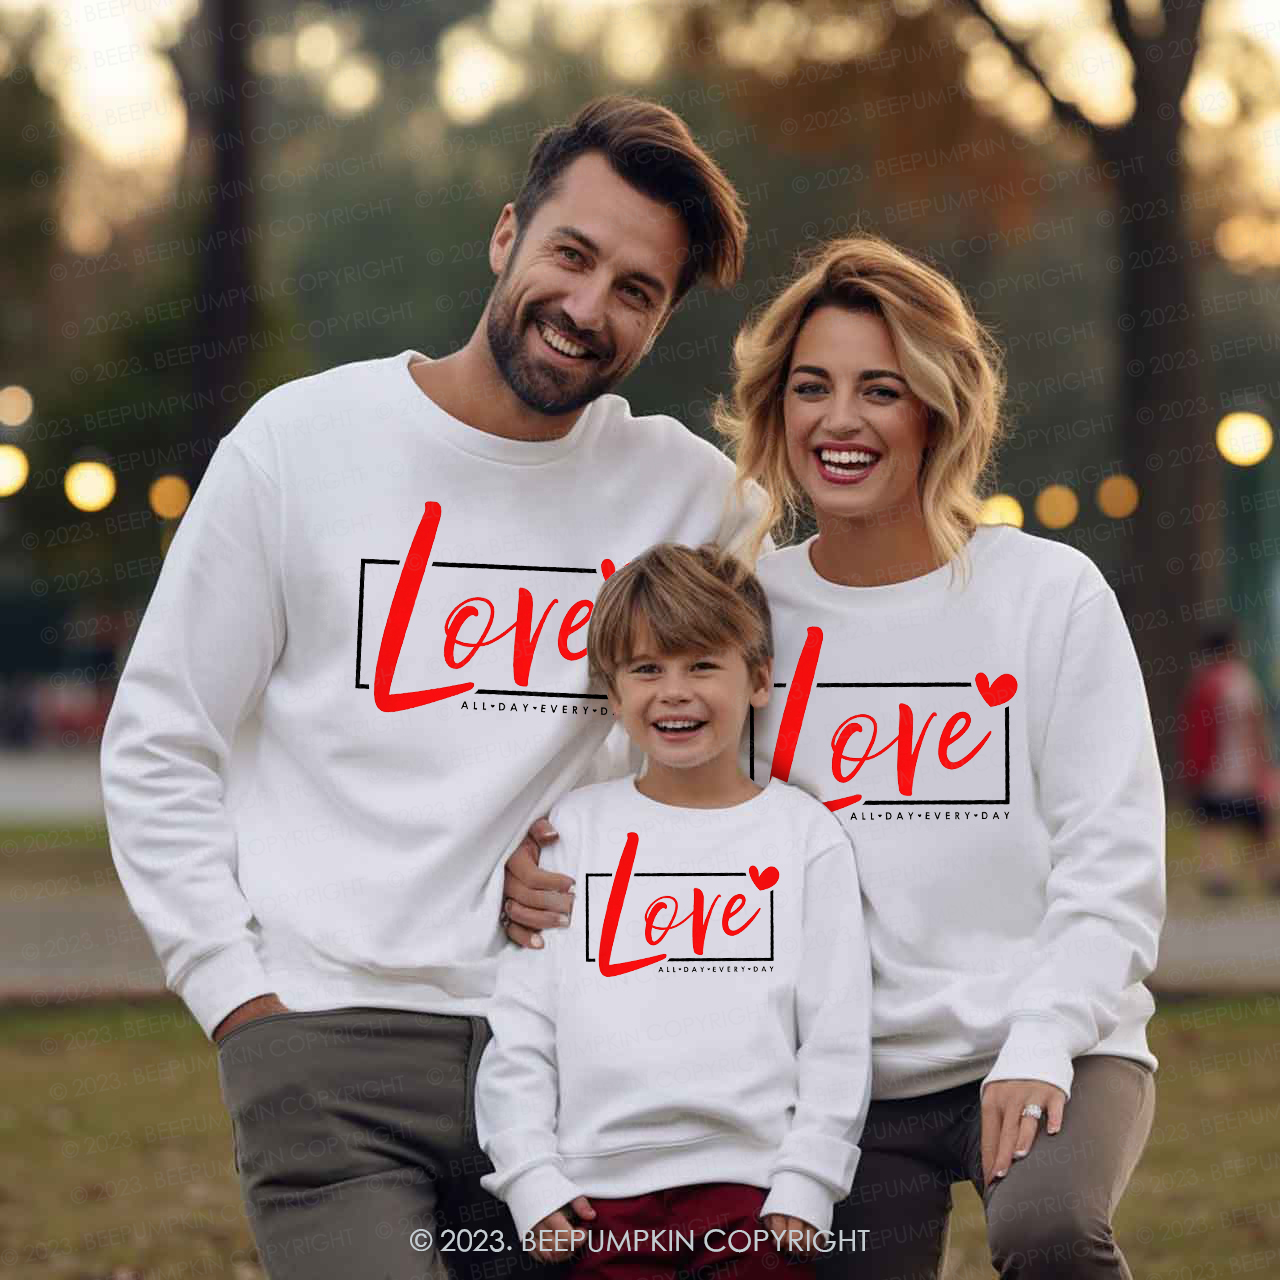 Love All Day Every Day Gift Valentine's Sweatshirts For Family